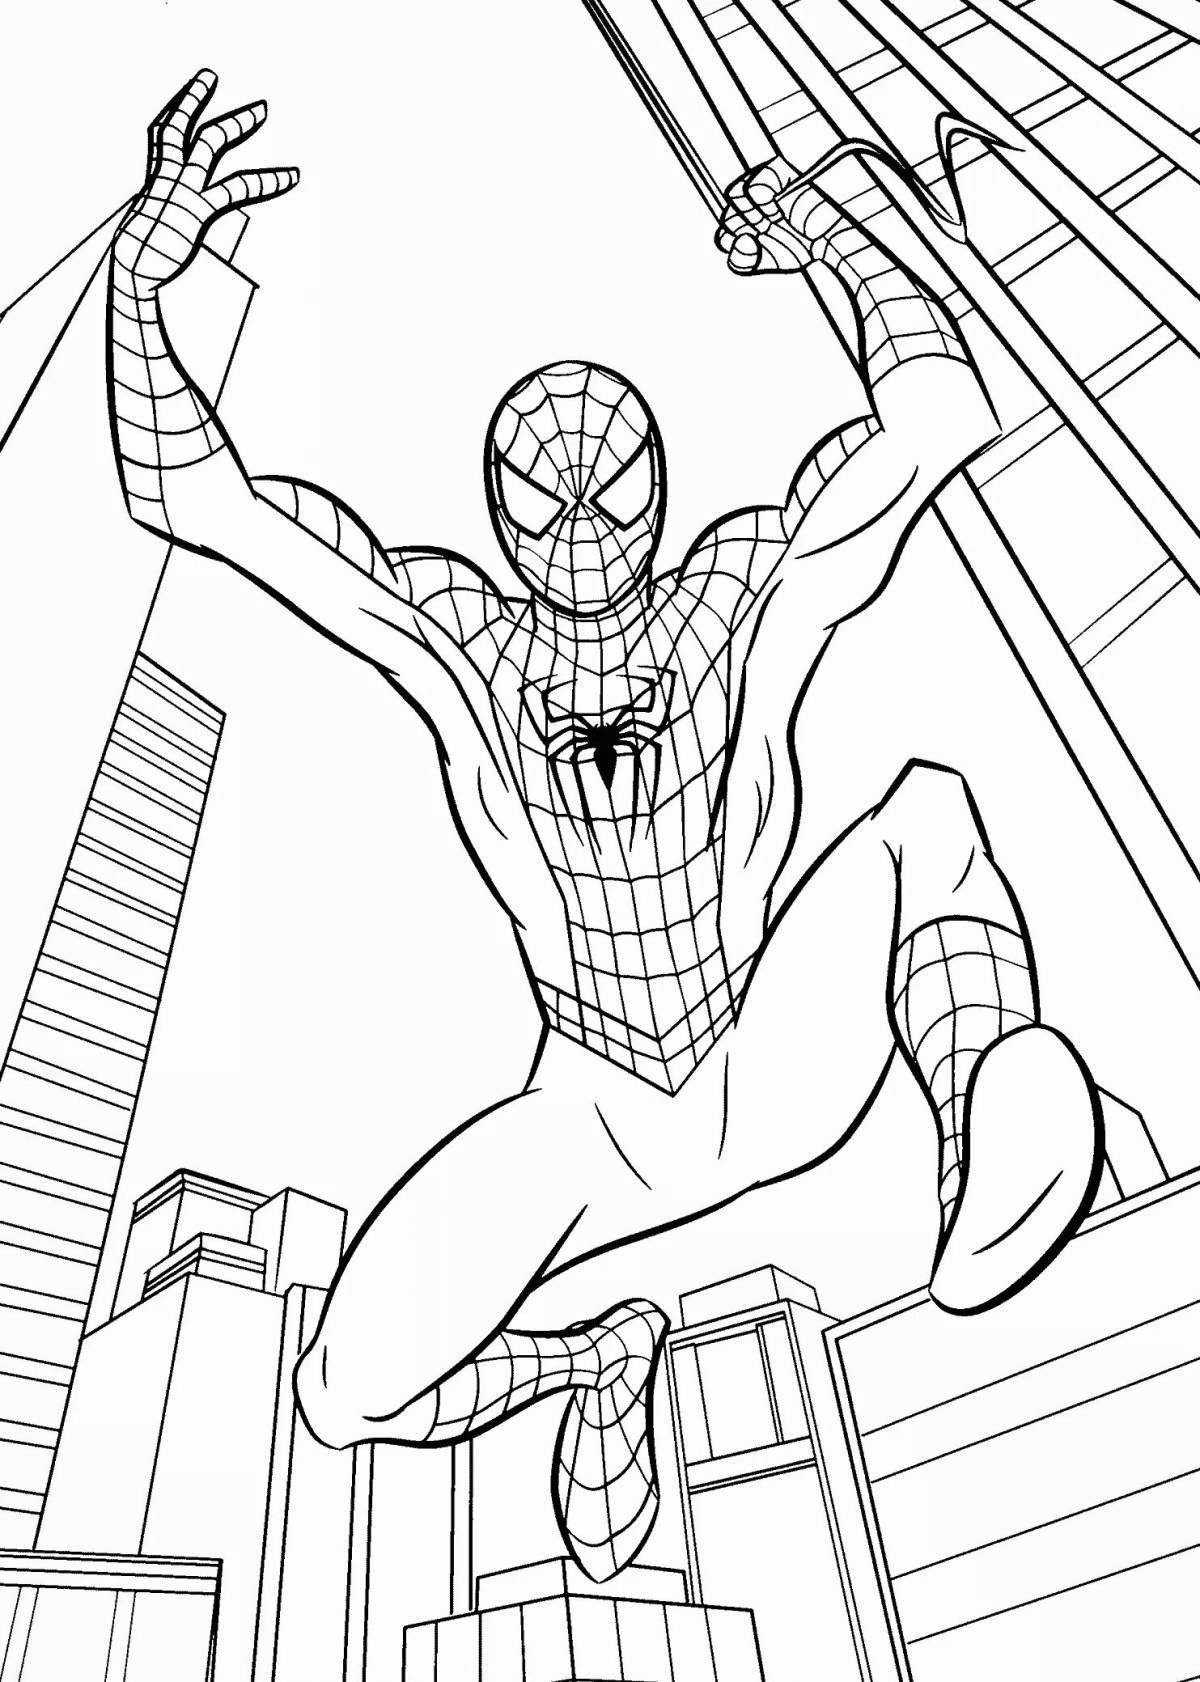 Fearless man coloring book